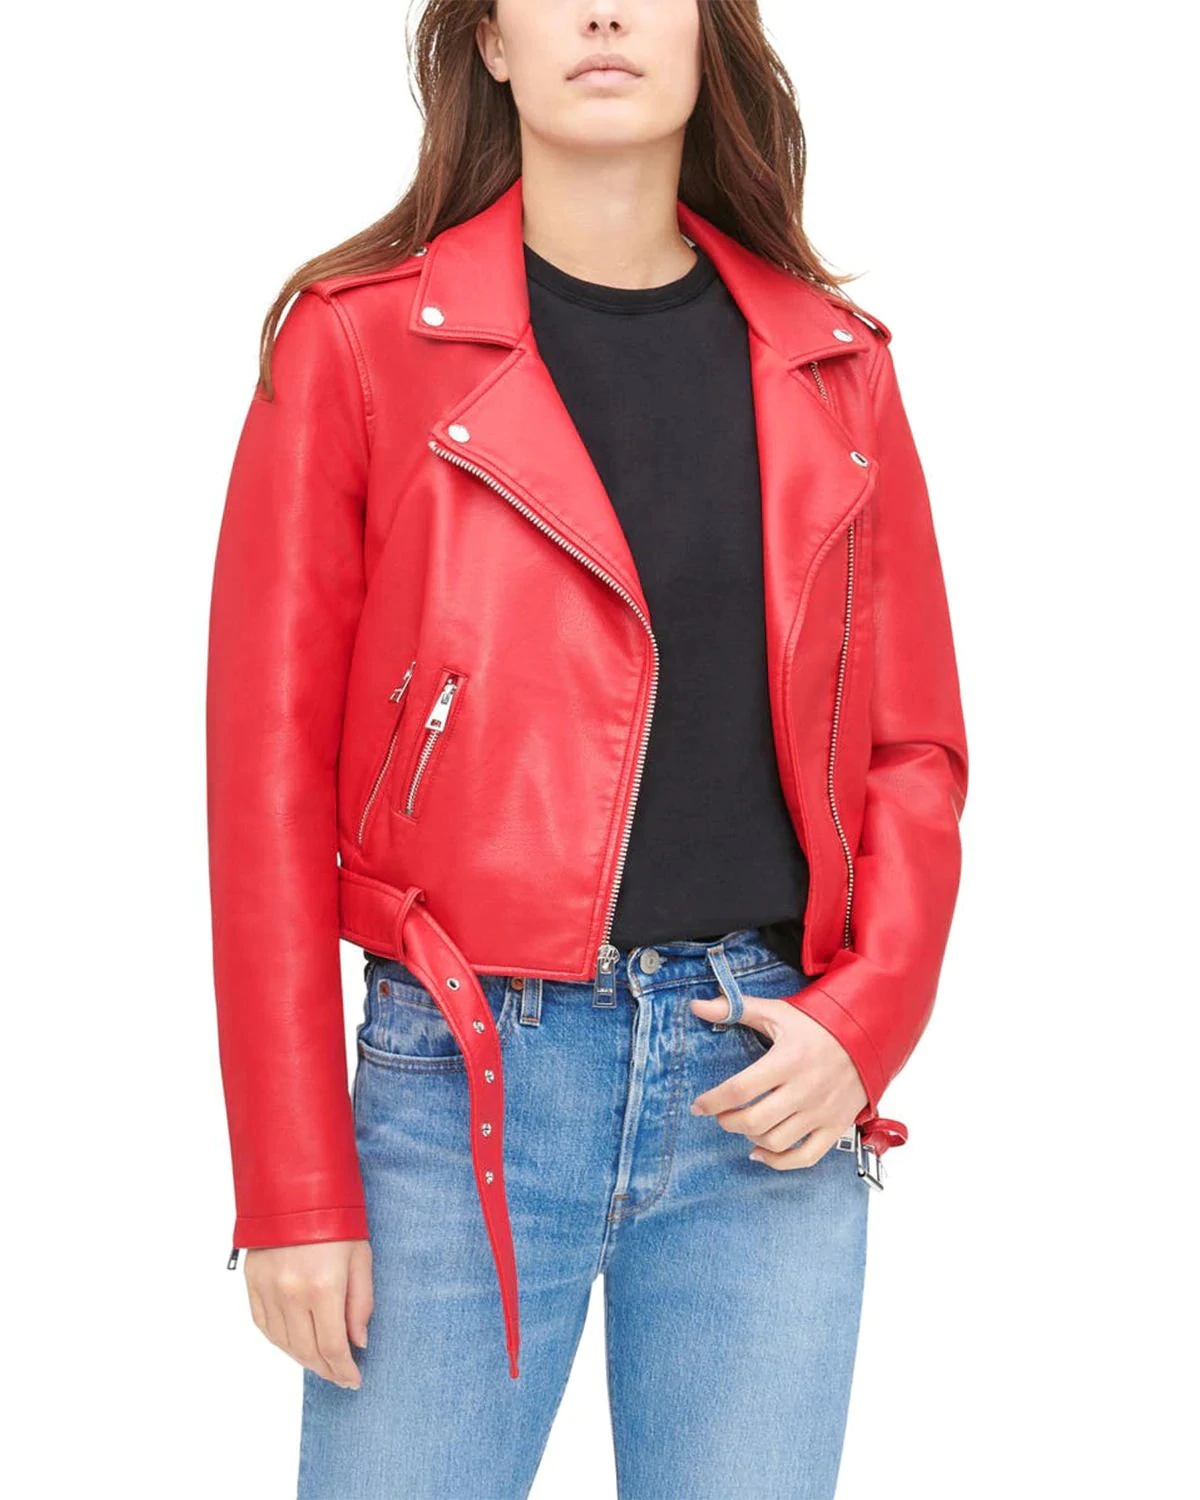 🔥SHORT RED BIKER LEATHER JACKET FOR WOMEN - CT-1-S